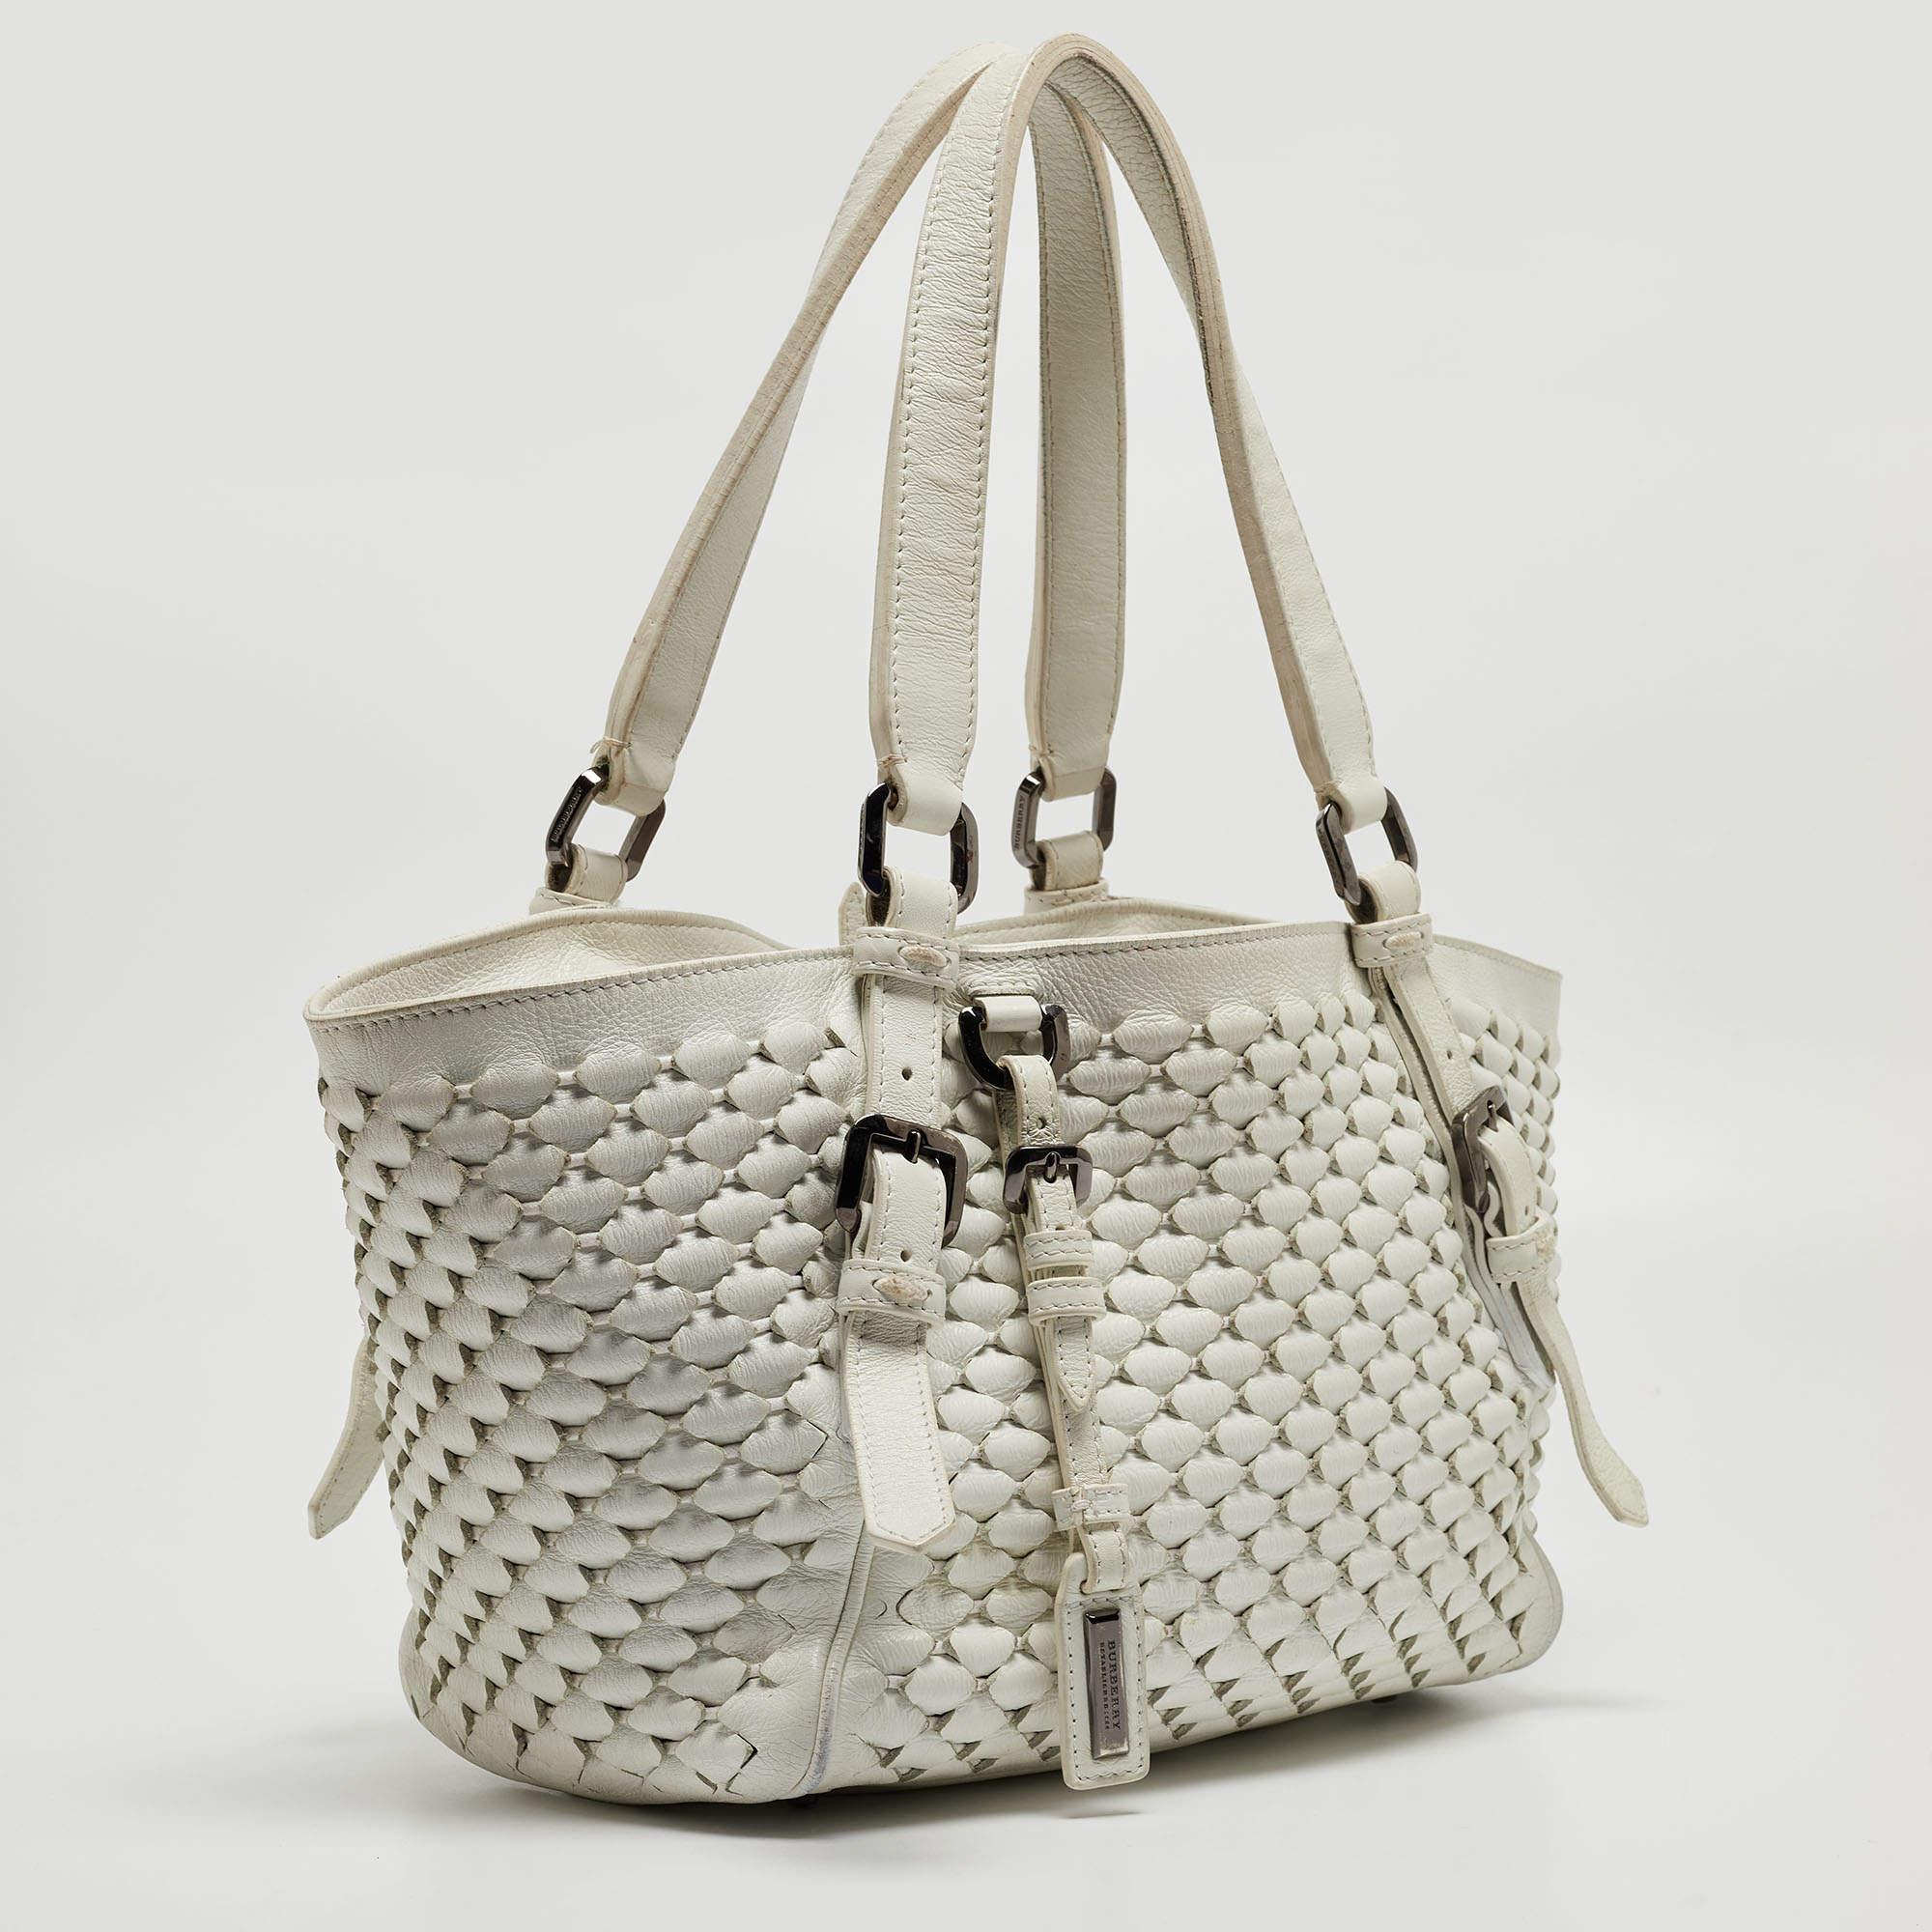 Burberry White Woven Leather Tote For Sale 12